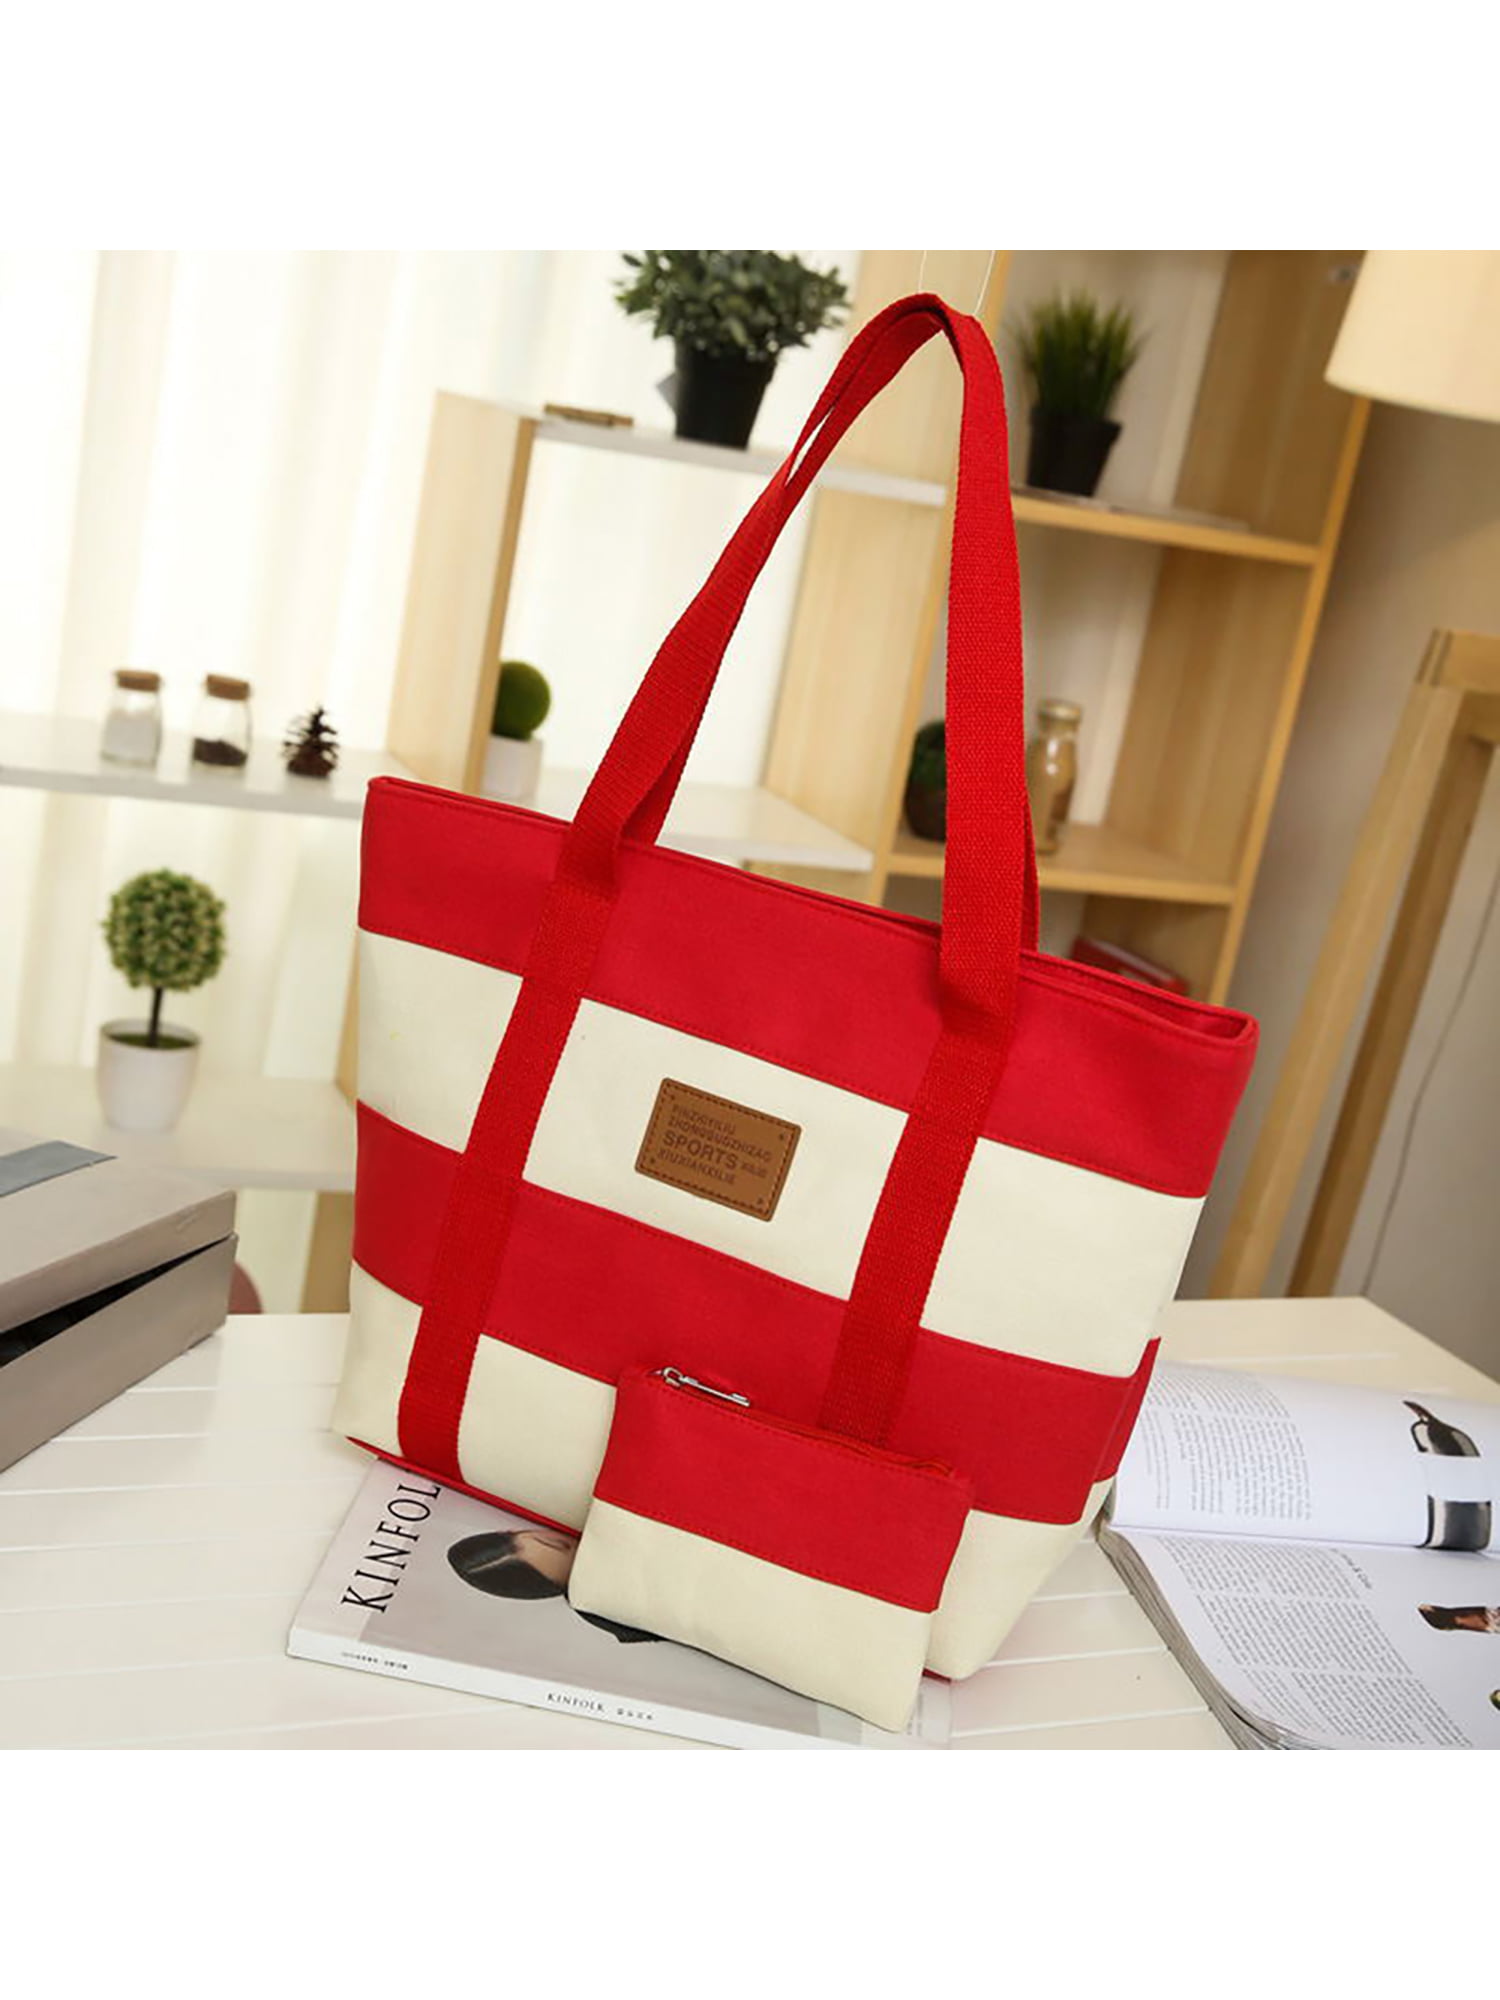 Woman Canvas Tote Bag Designer Women Two Tone Handbags Lady Shopping Bag  College Beach Totes Large Capacity Quality Classic Lettering Pouch Interior  Zipper Pocket From Bagdesigner, $84.66